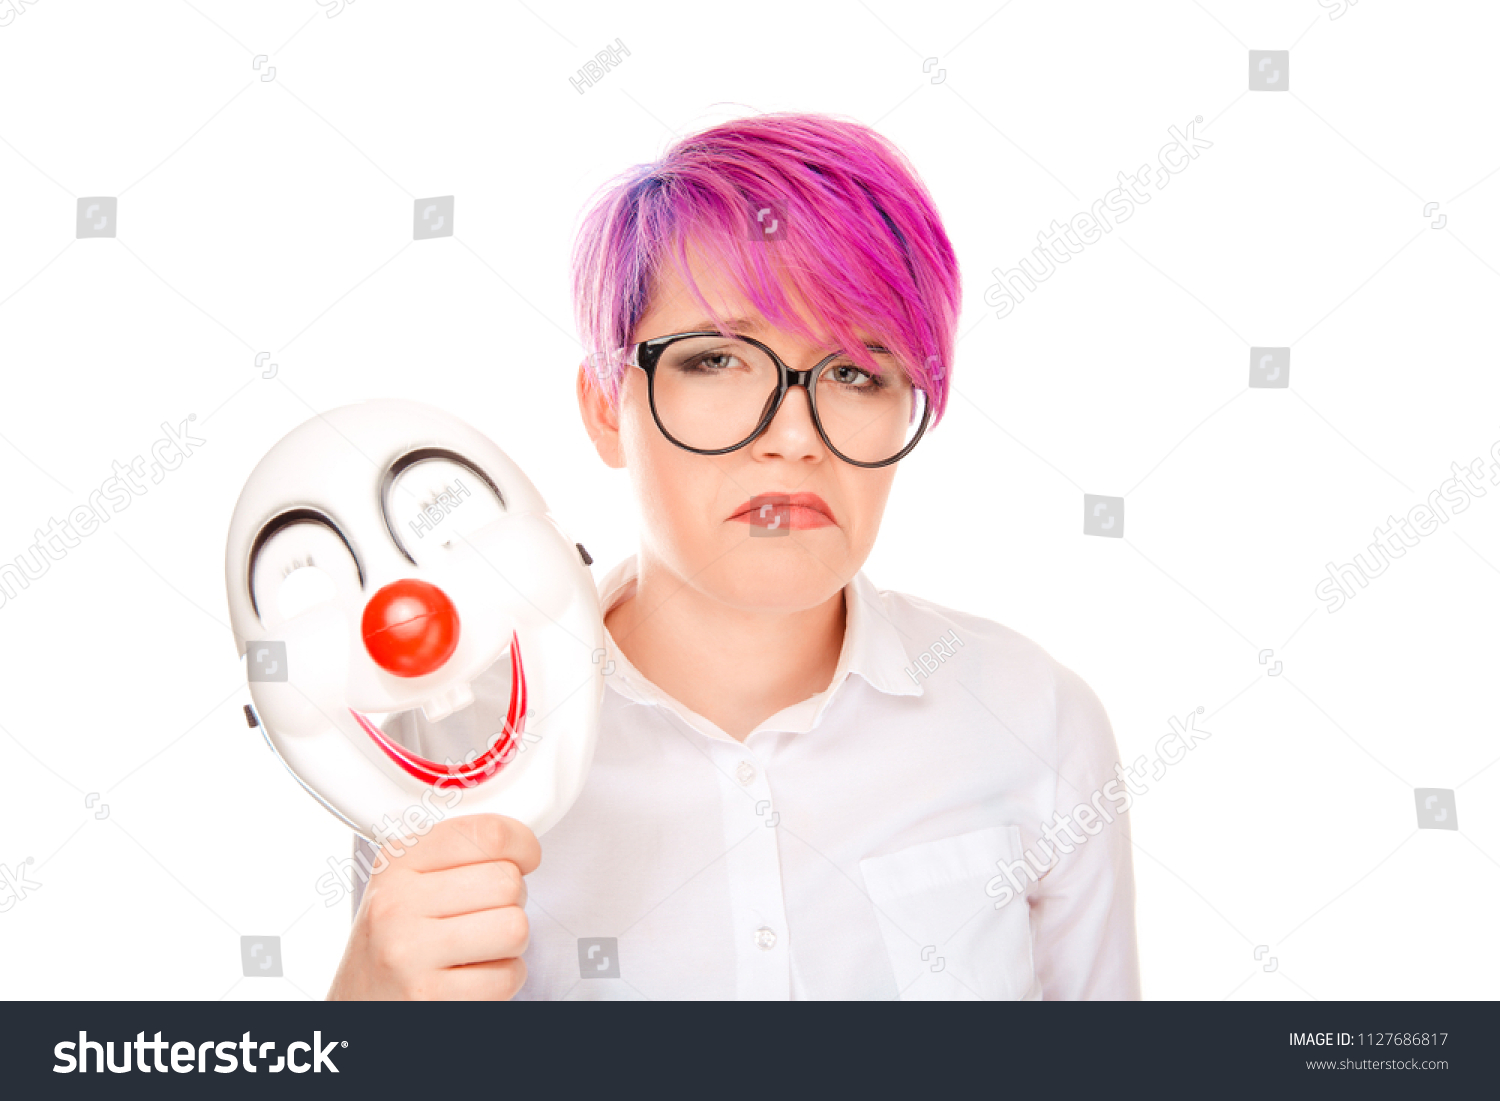 Portrait young upset worried woman with sad expression taking off clown mask expressing cheerfulness happiness isolated on white wall background. Negative facial expressions, human face emotions. #1127686817